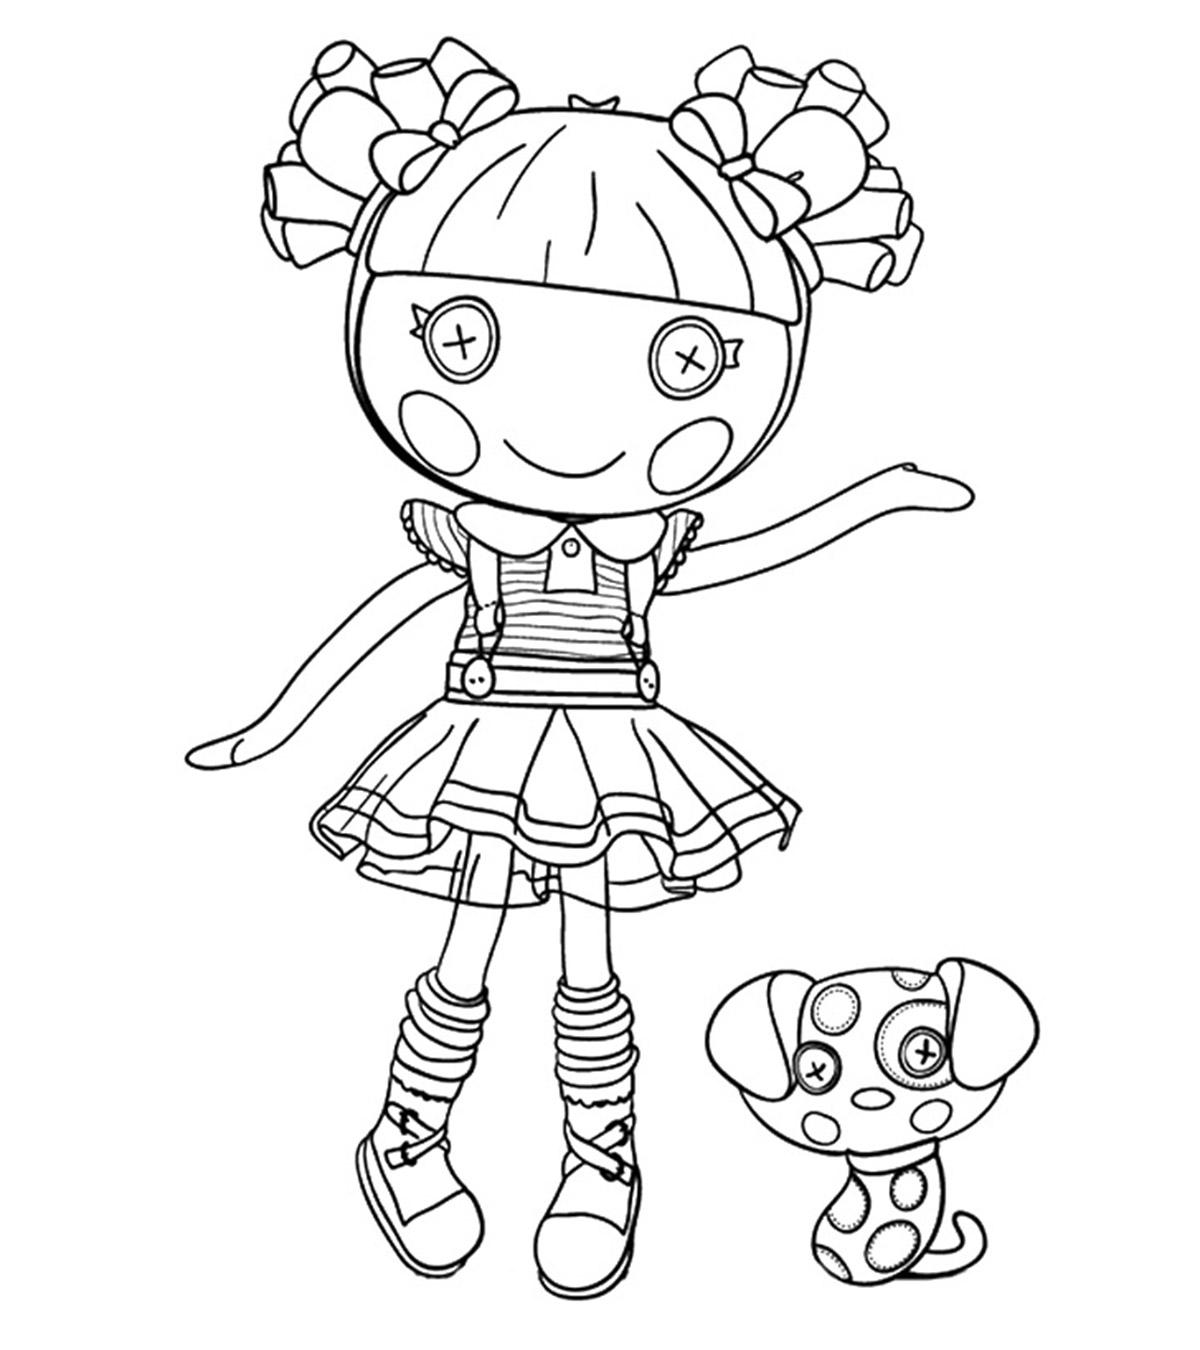 Top 20 Lalaloopsy Coloring Pages Your Toddler Will Love_image